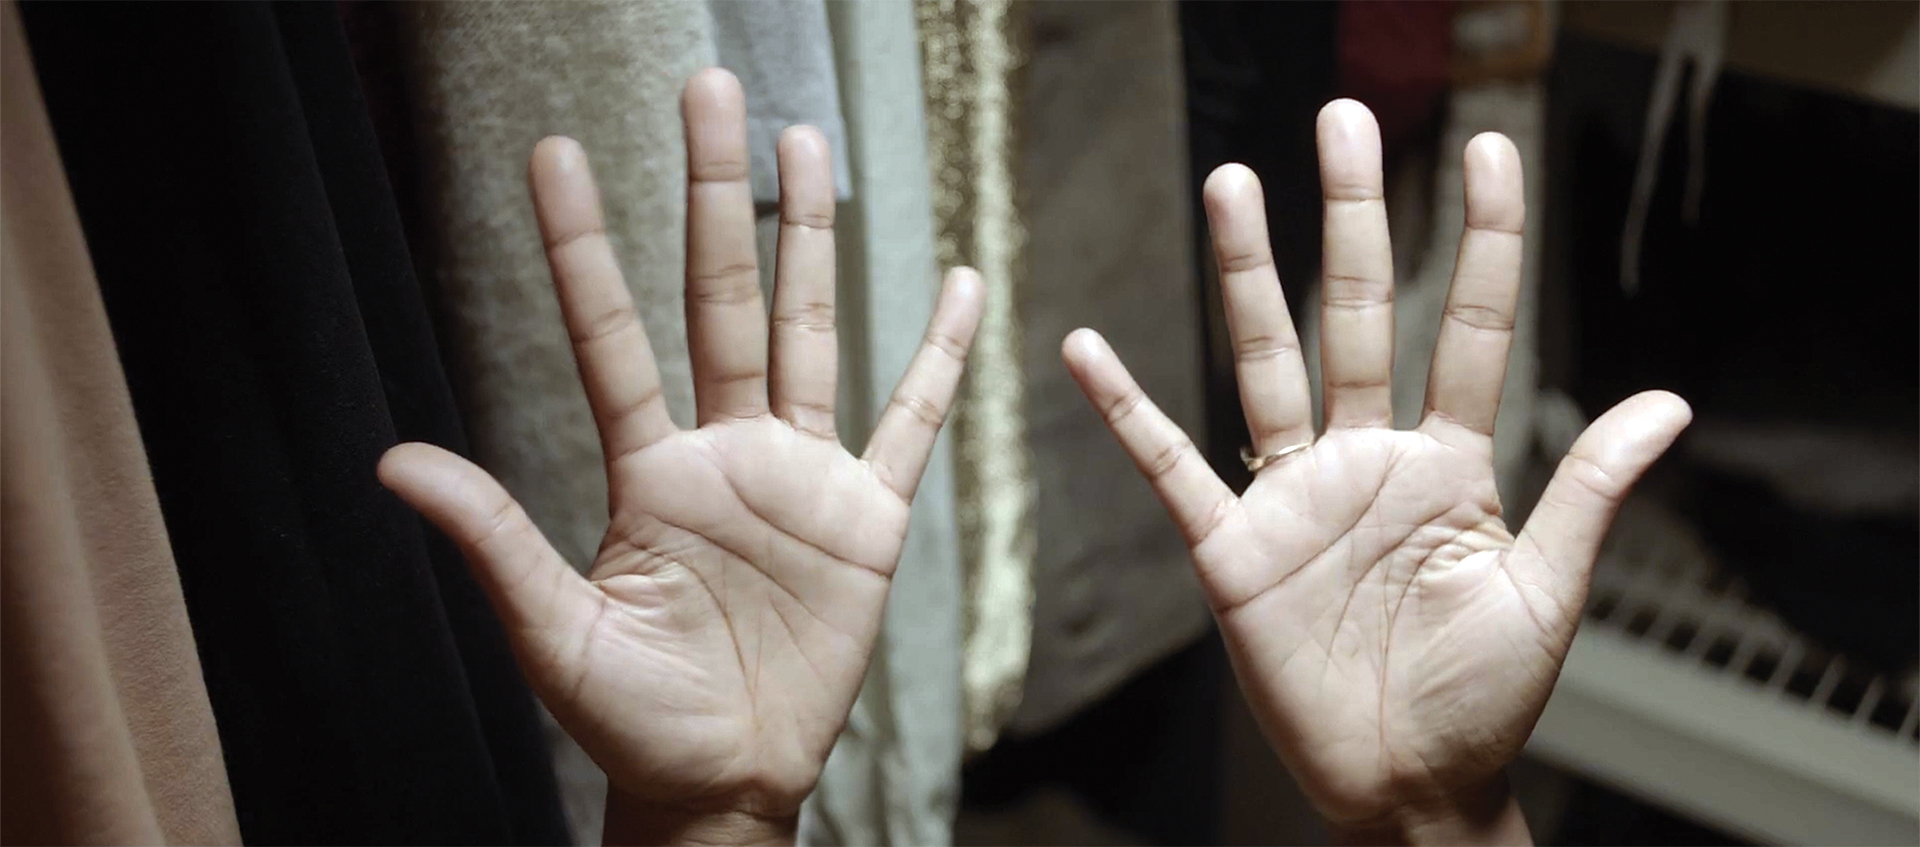 Close-up of Black, deaf actor Nyeisha Prince’s hands, which are held upright with their palms facing the camera.